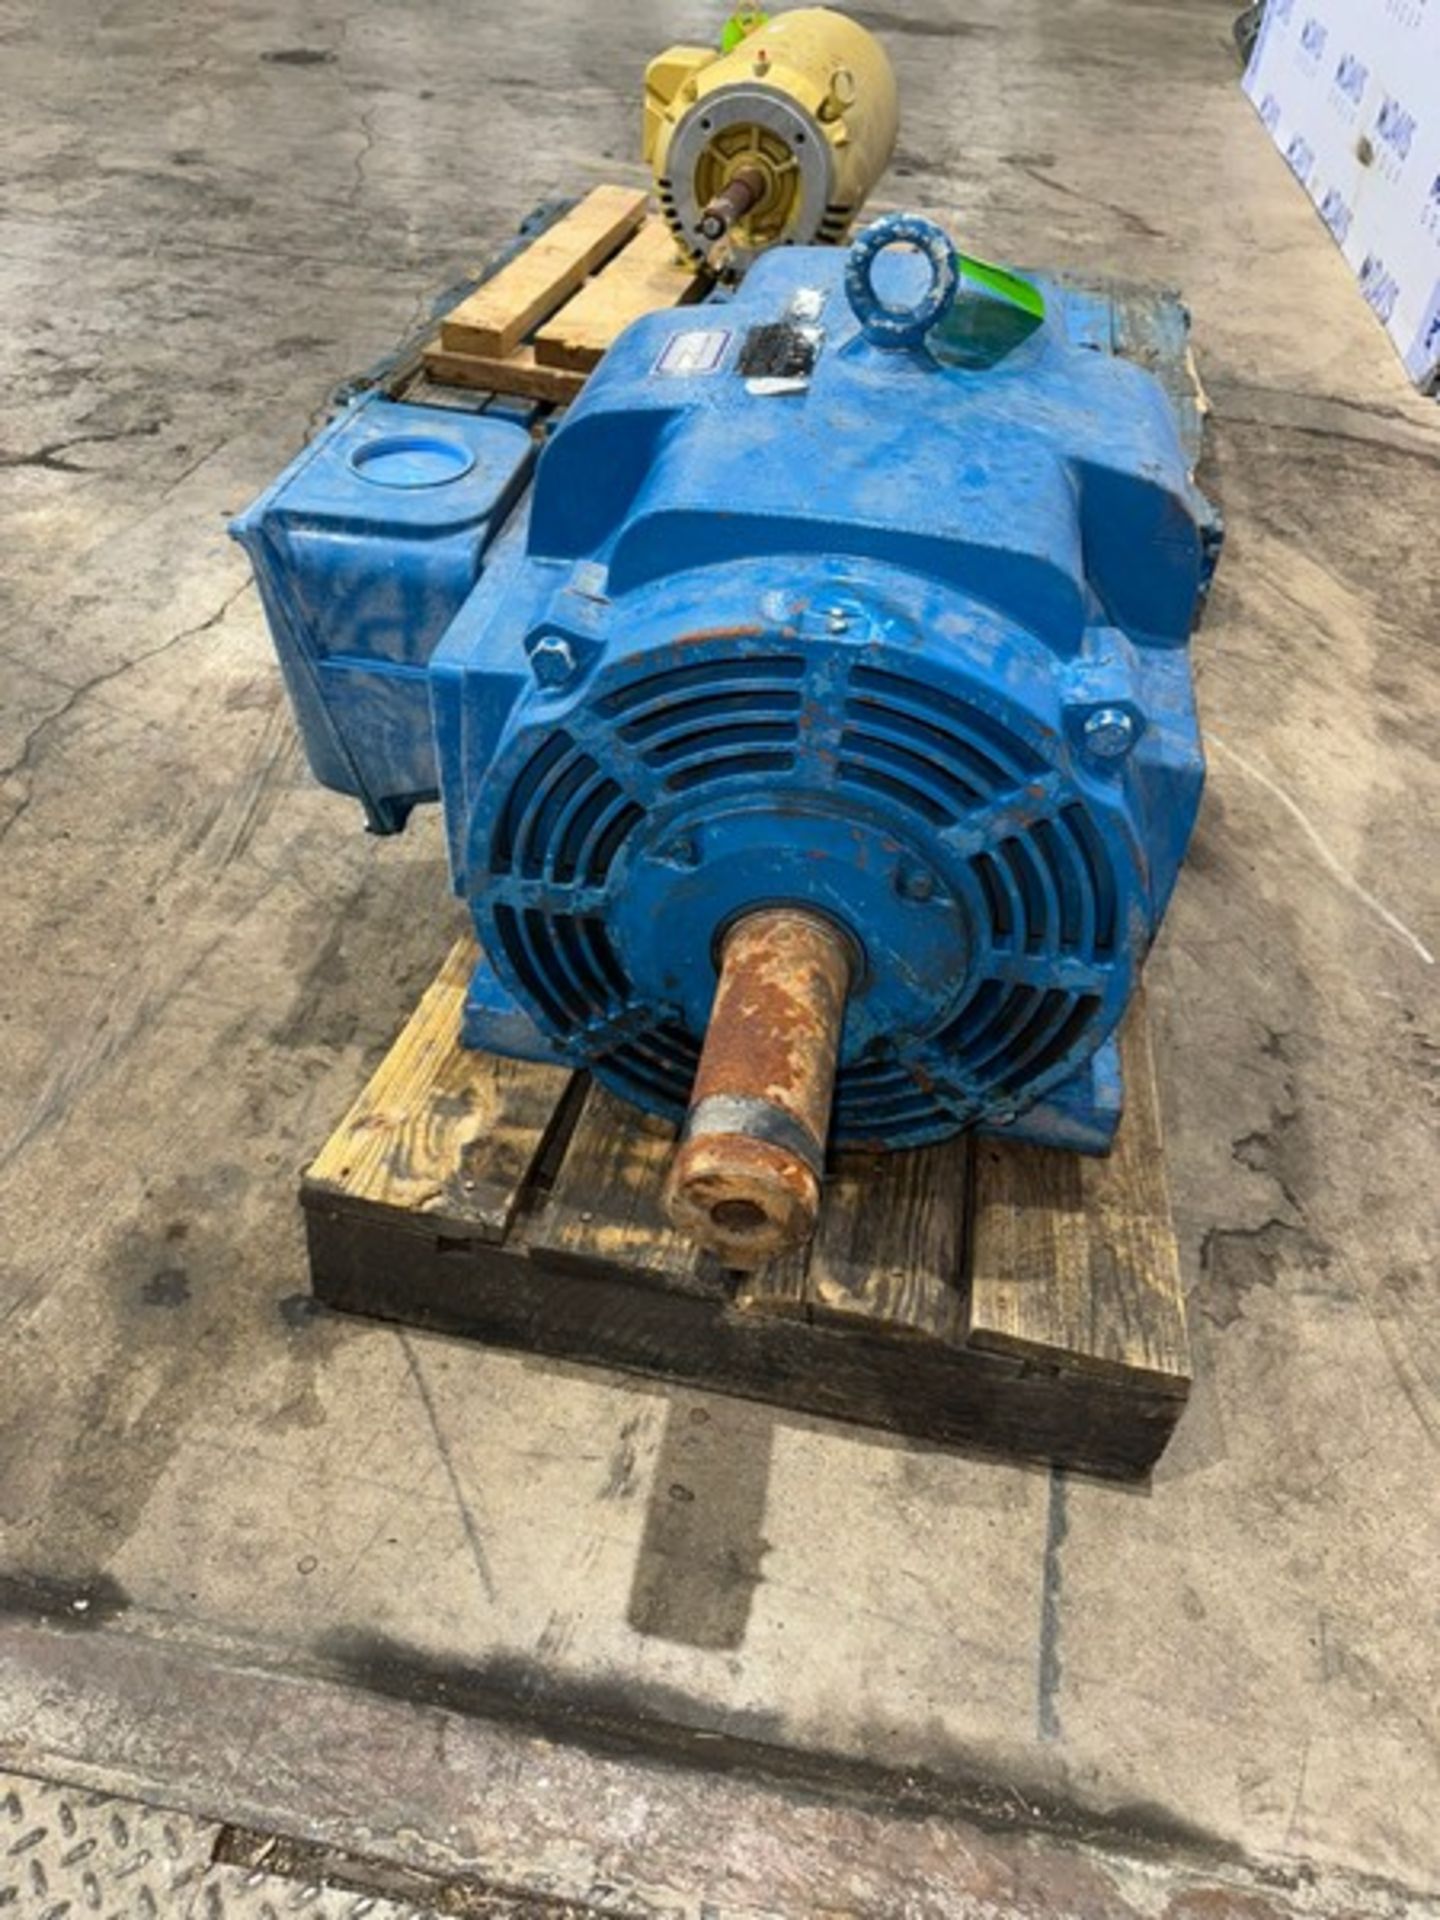 WEG 100 hp Motor, 208-230/460 Volts, 3 Phase, 1775 RPM (INV. #106521) (LOCATED MONROEVILLE, PA) ( - Image 4 of 6